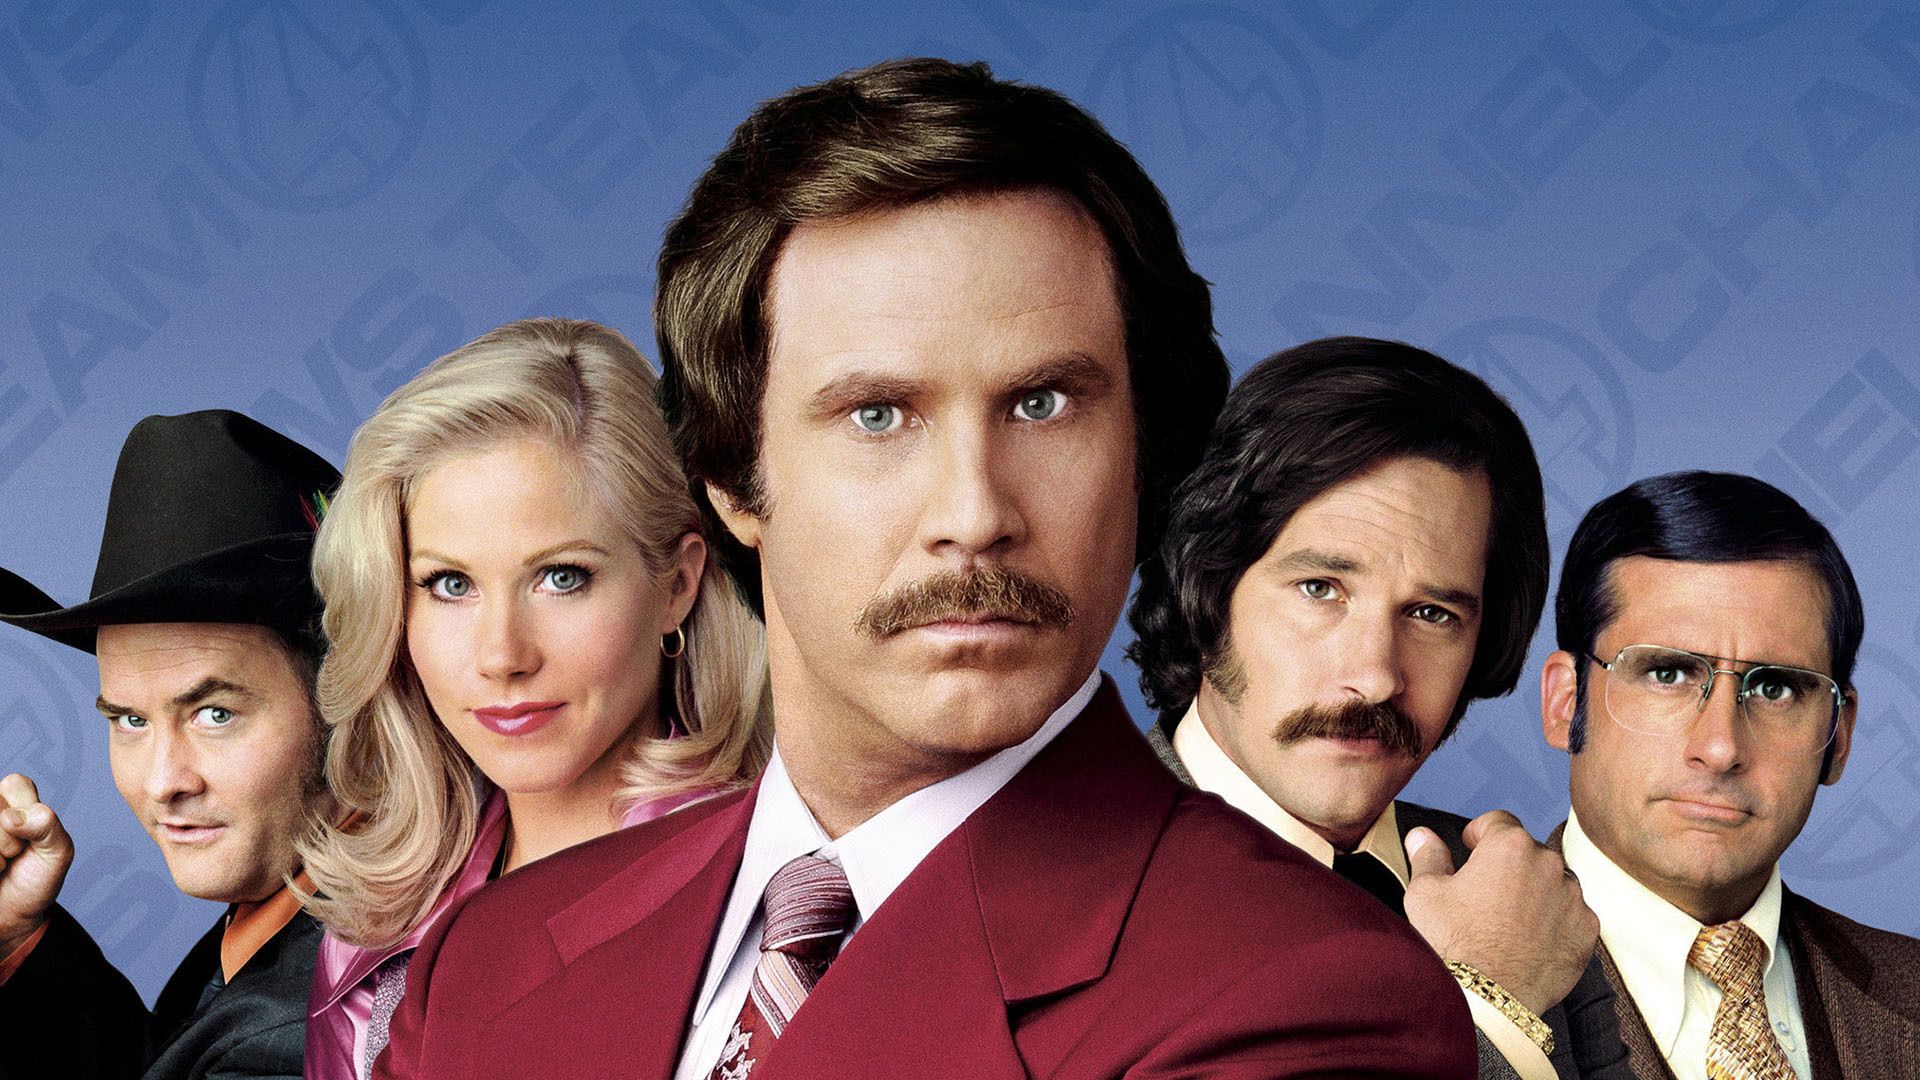 Anchorman: The Legend of Ron Burgundy background